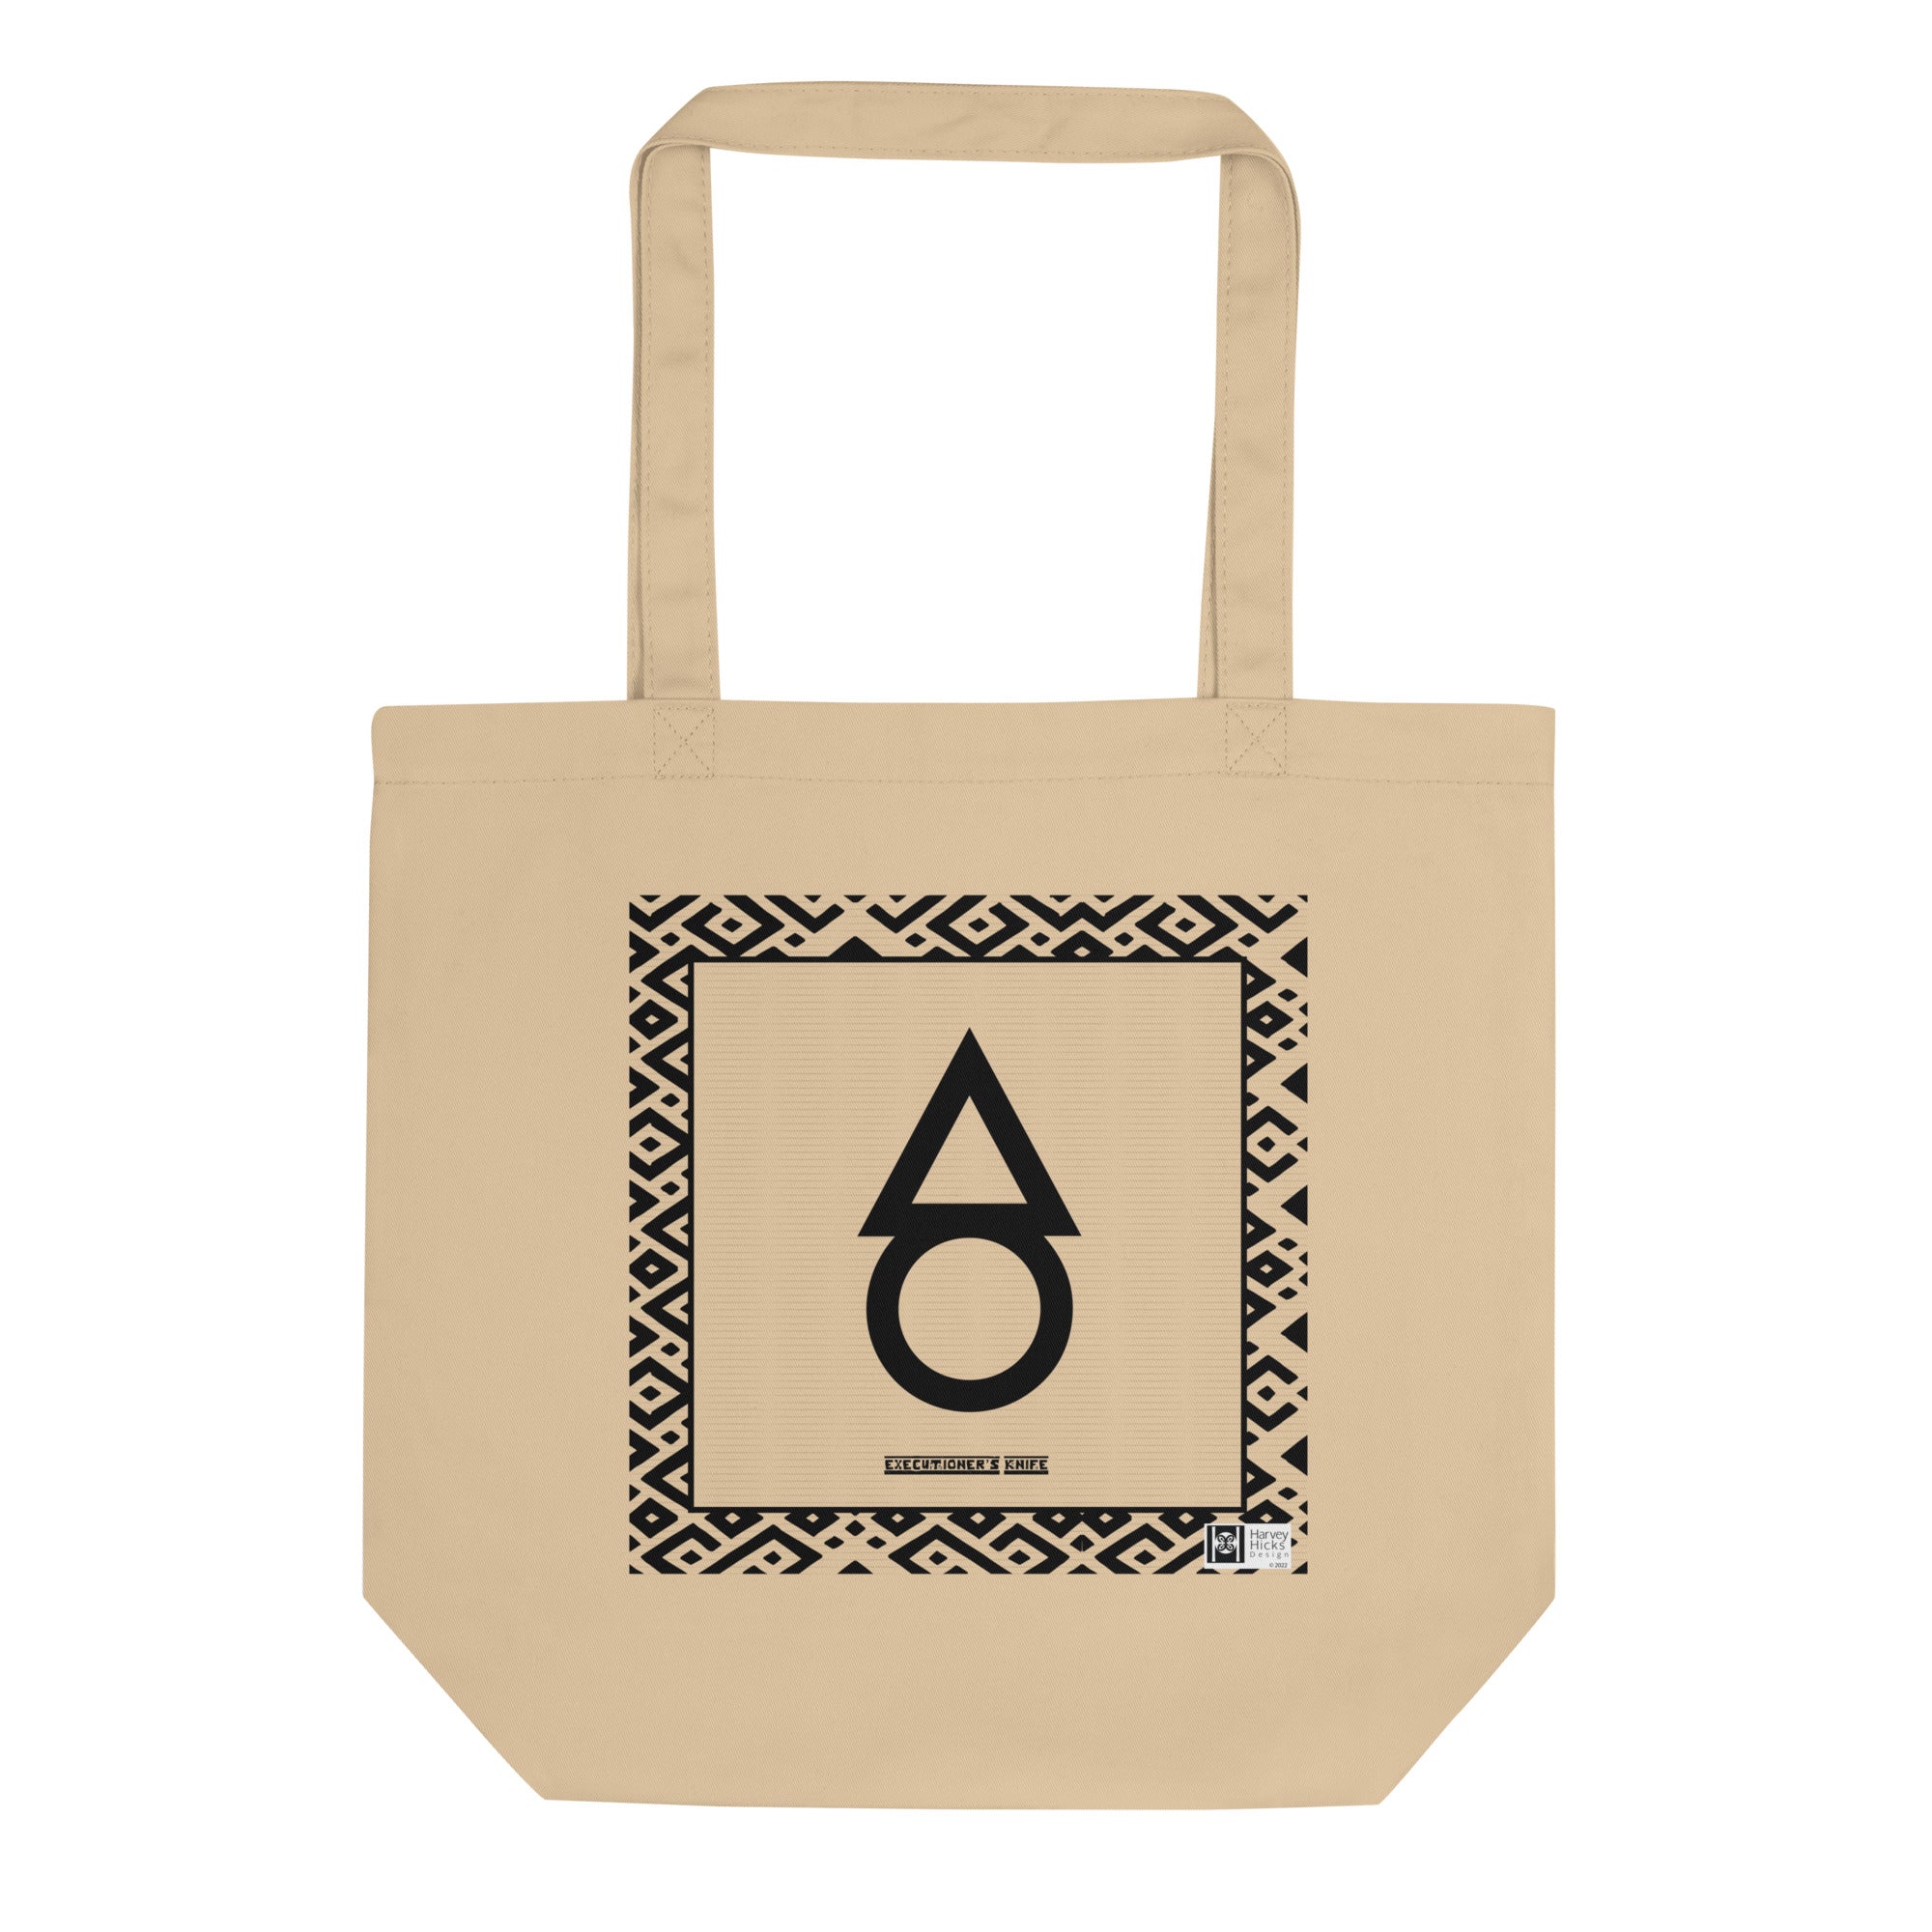 100% cotton Eco Tote Bag, featuring the Adinkra symbol for cutting through, clarity